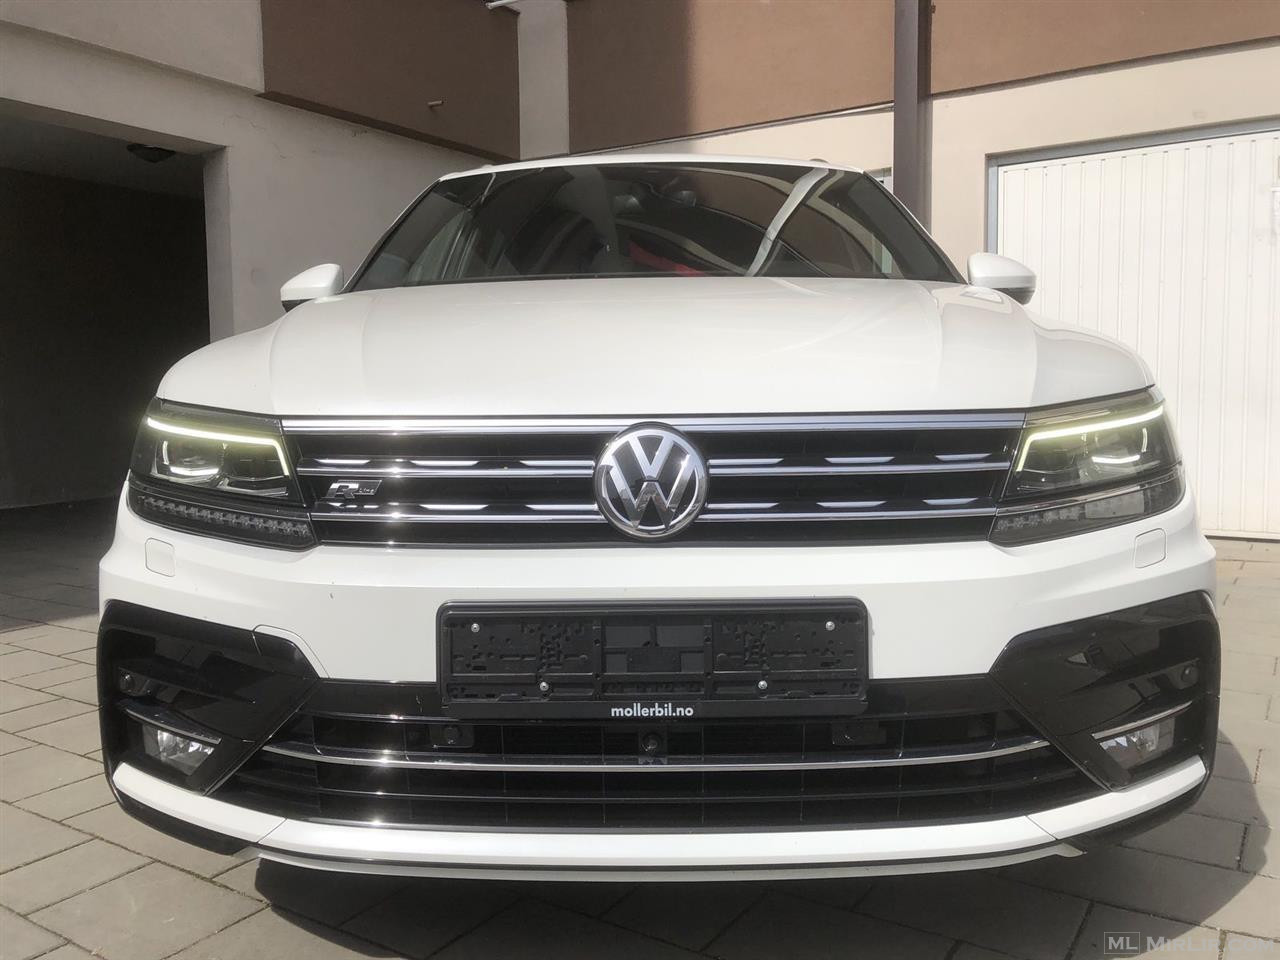 Tiguan R line 190 Ps.  Ngjyra i bardh perlle 3 her R line 